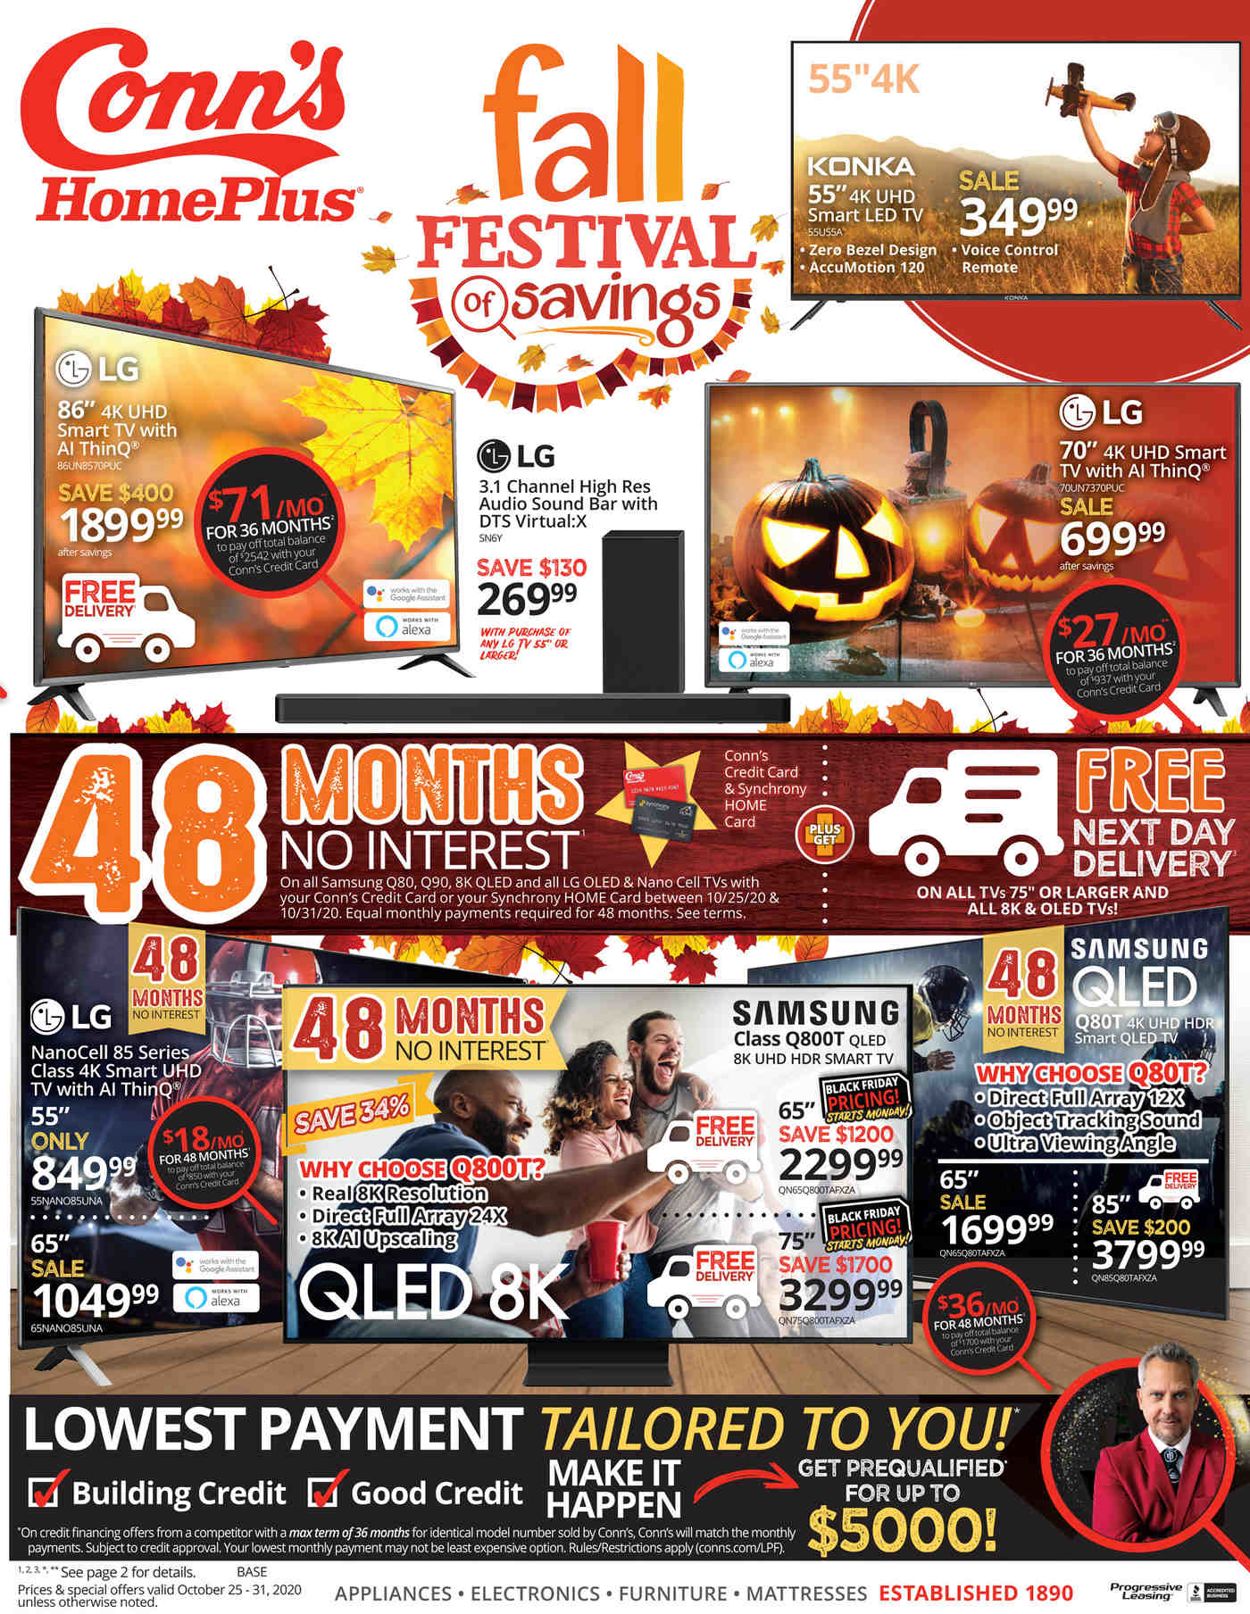 Conn's Home Plus Black Friday 2020 Weekly Ad Circular - valid 10/25-10/31/2020